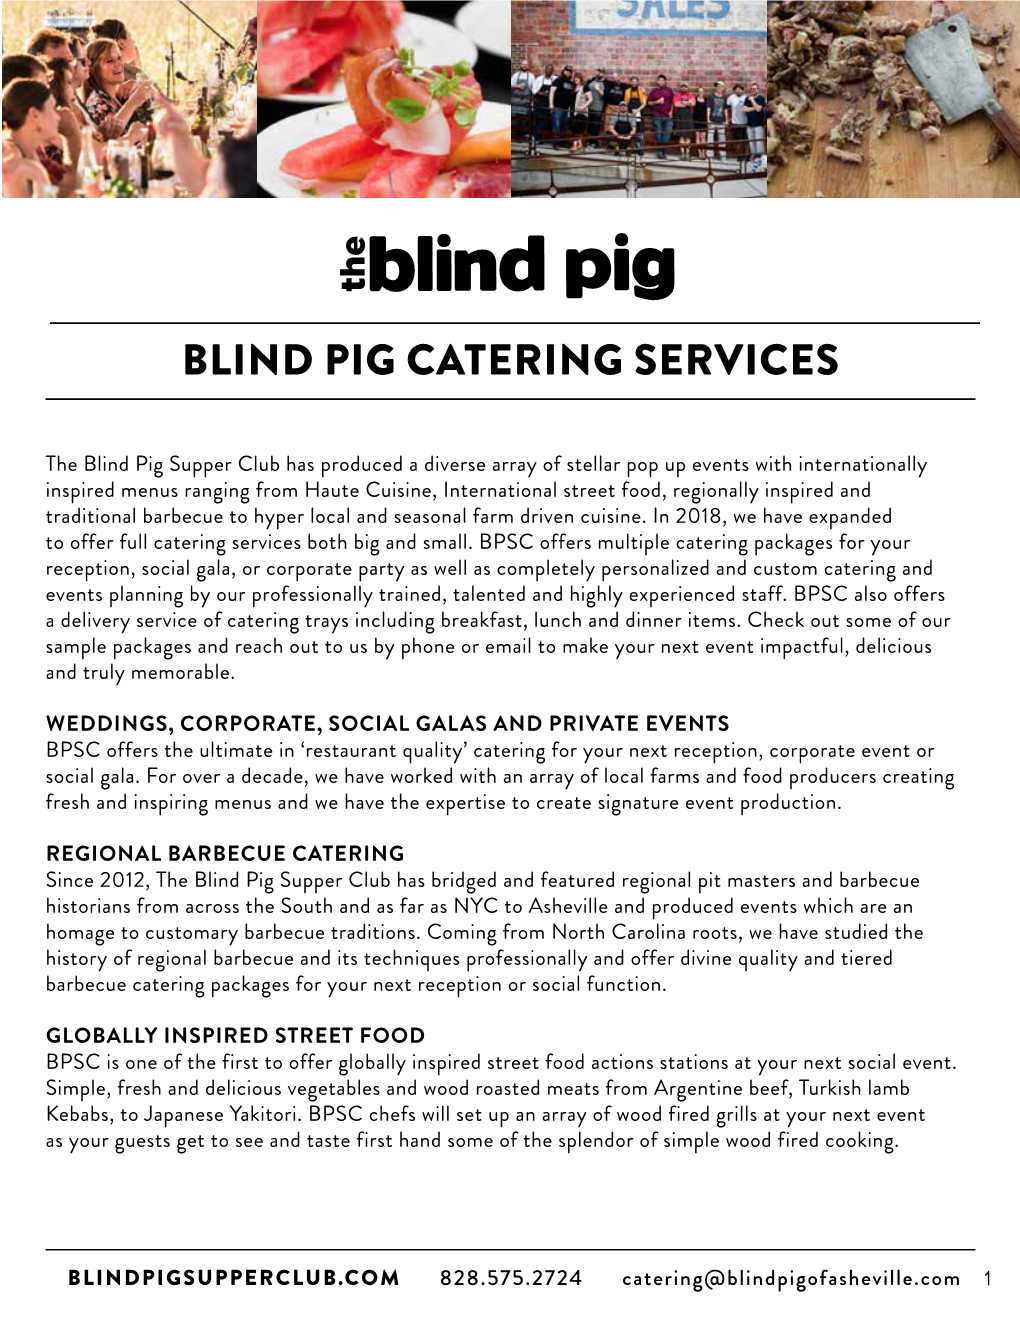 Blind Pig Catering Services